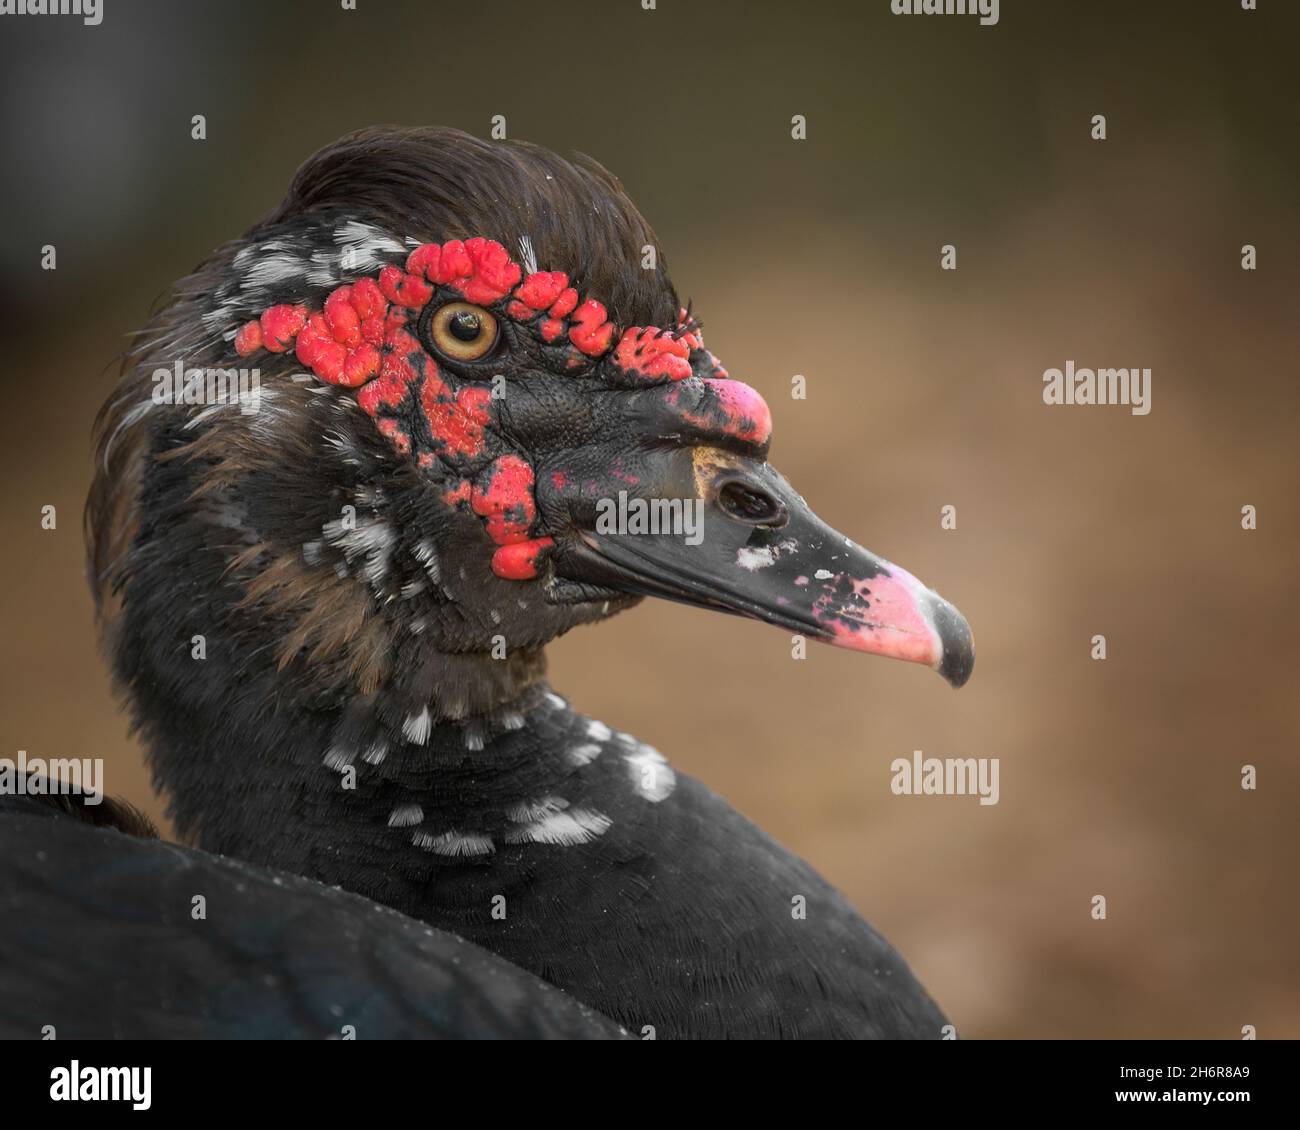 Ugly Muscovy closeup profile duck portrait with red surrounding eye Stock Photo